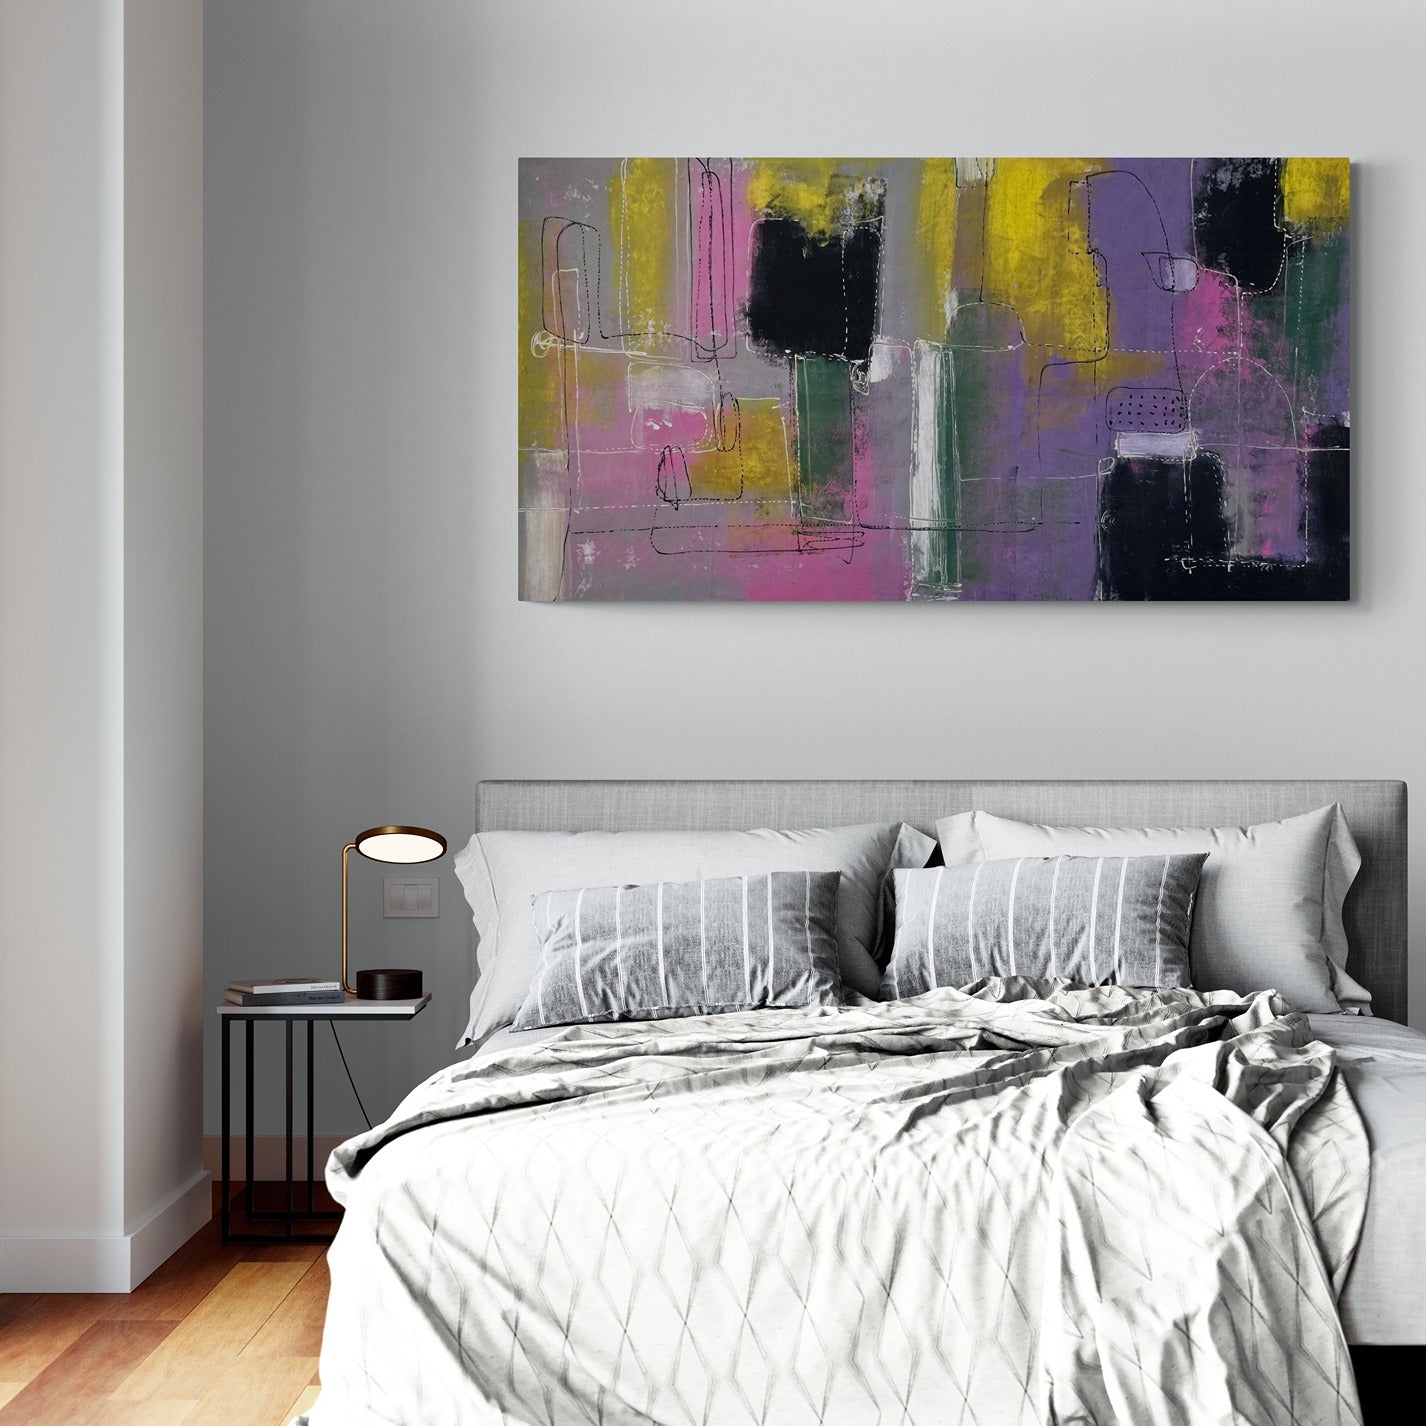 Large original hand painted wall art inside a modern bedroom  with a side table